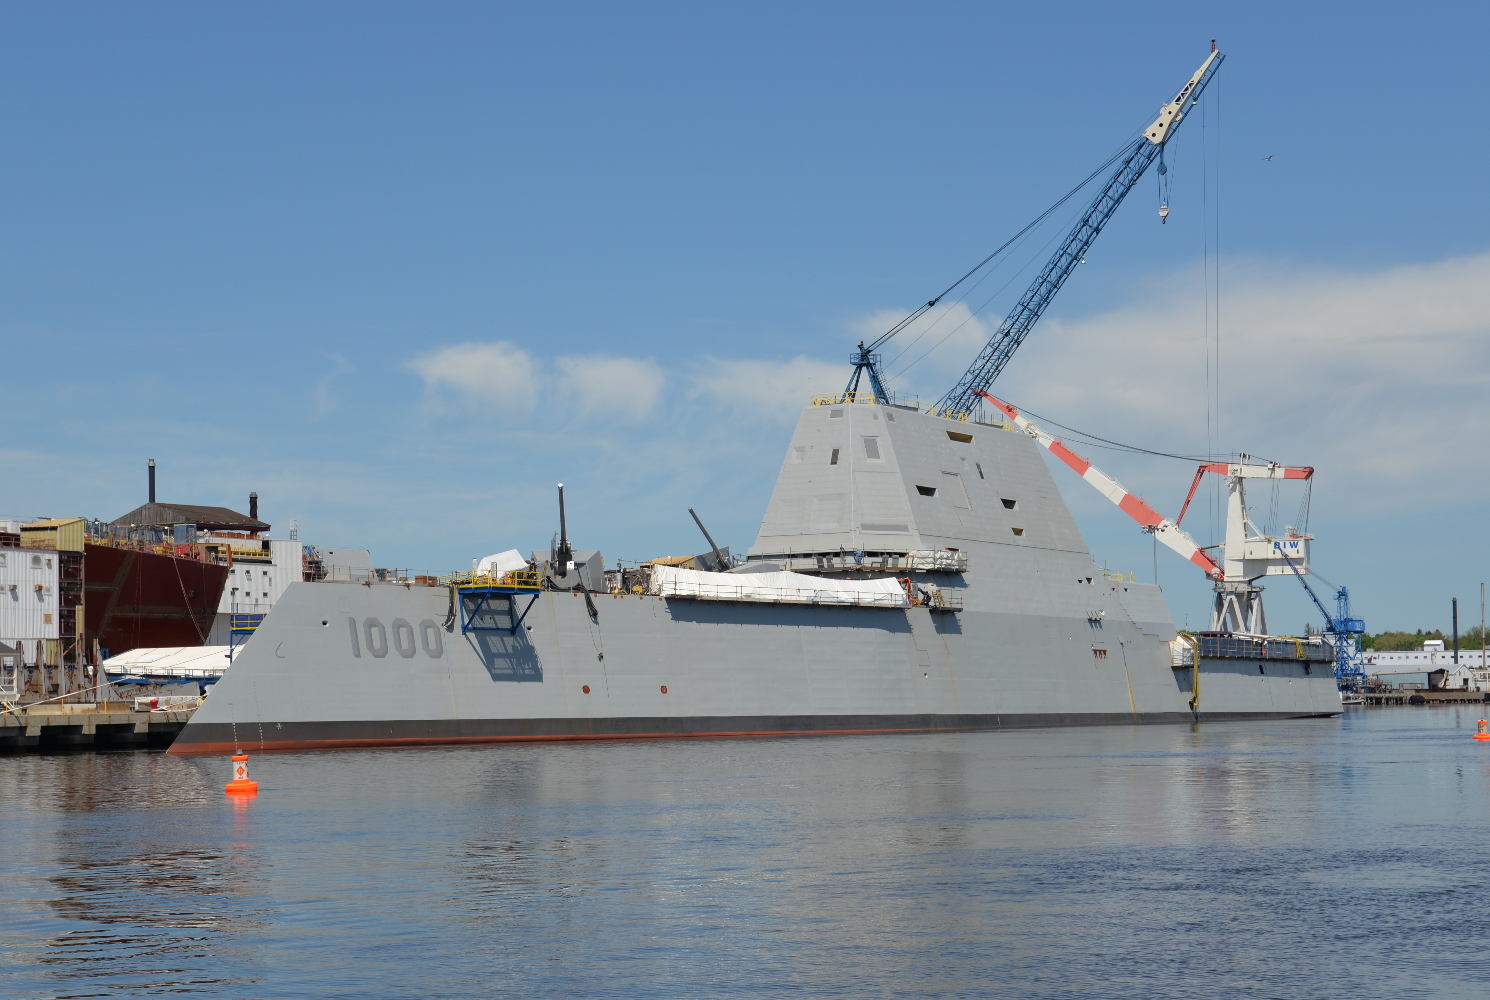 The Zumwalt's shape is intended to reduce the radar cross section to look like a fishing boat, according to the US Navy.